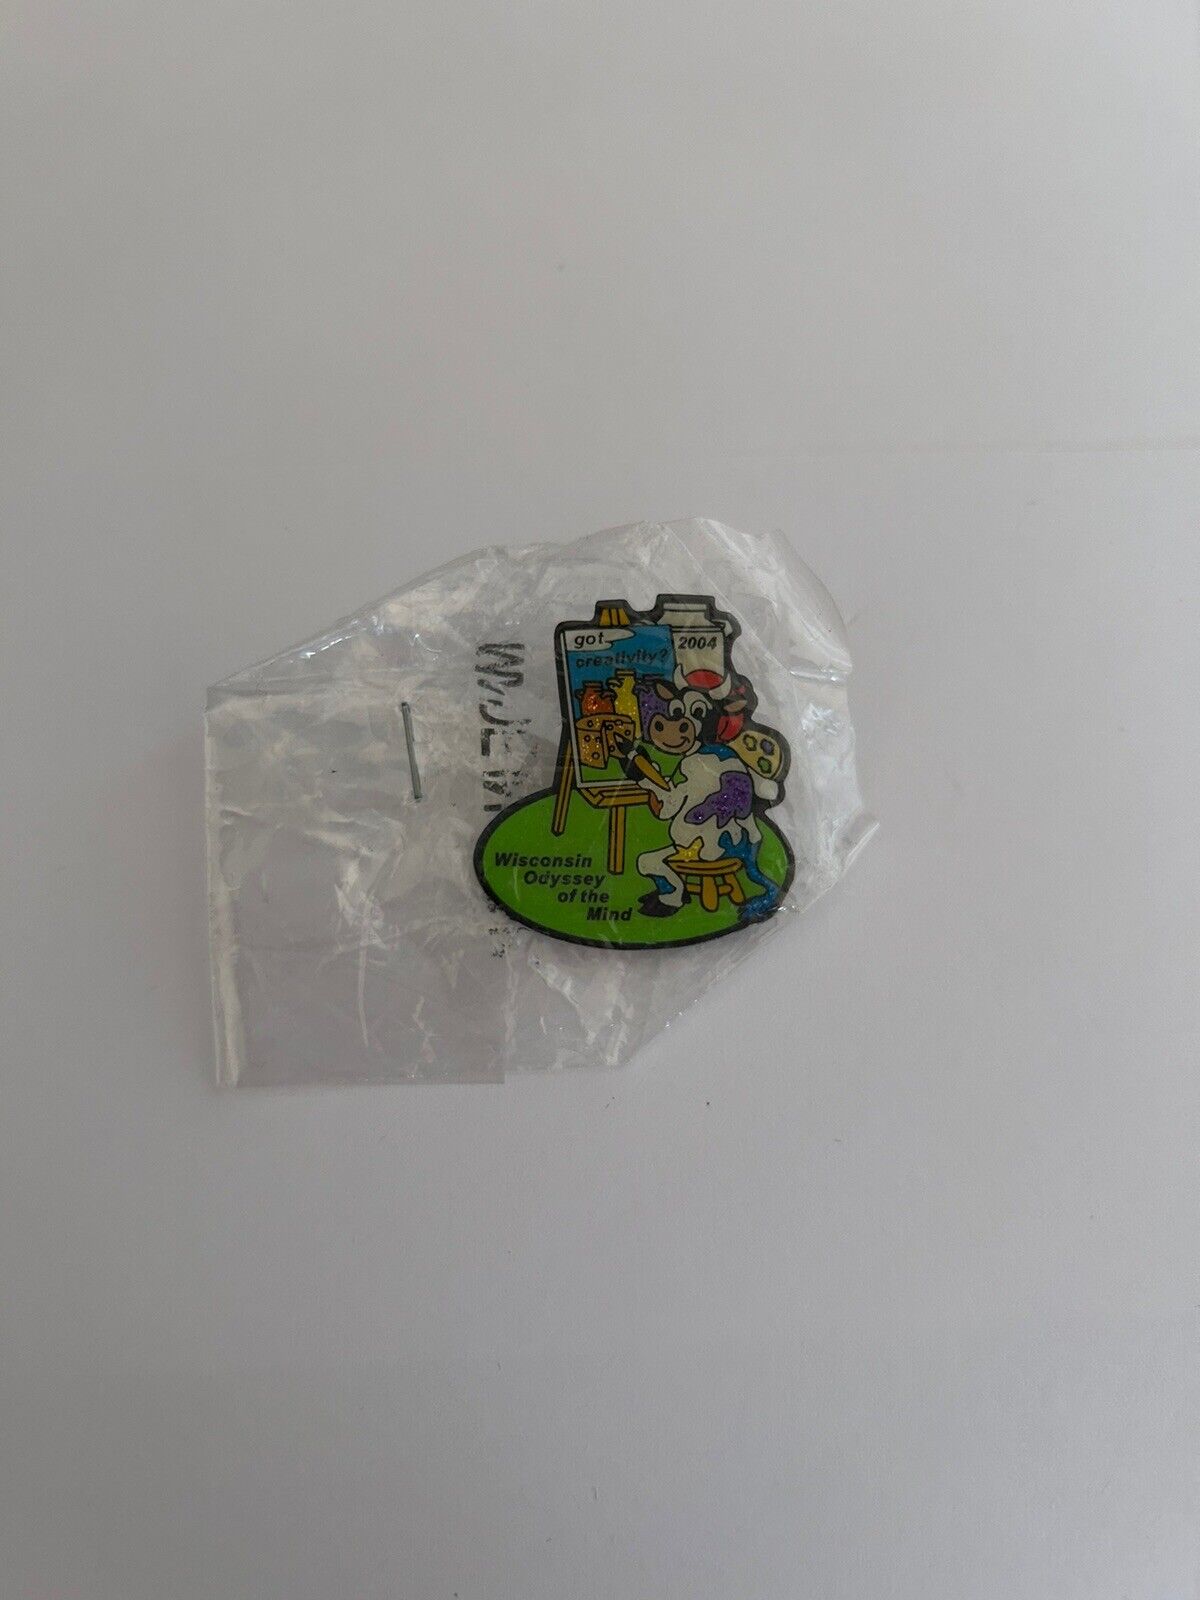 Wisconsin 2004 Odyssey of the Mind Pin OOTM - New in Plastic